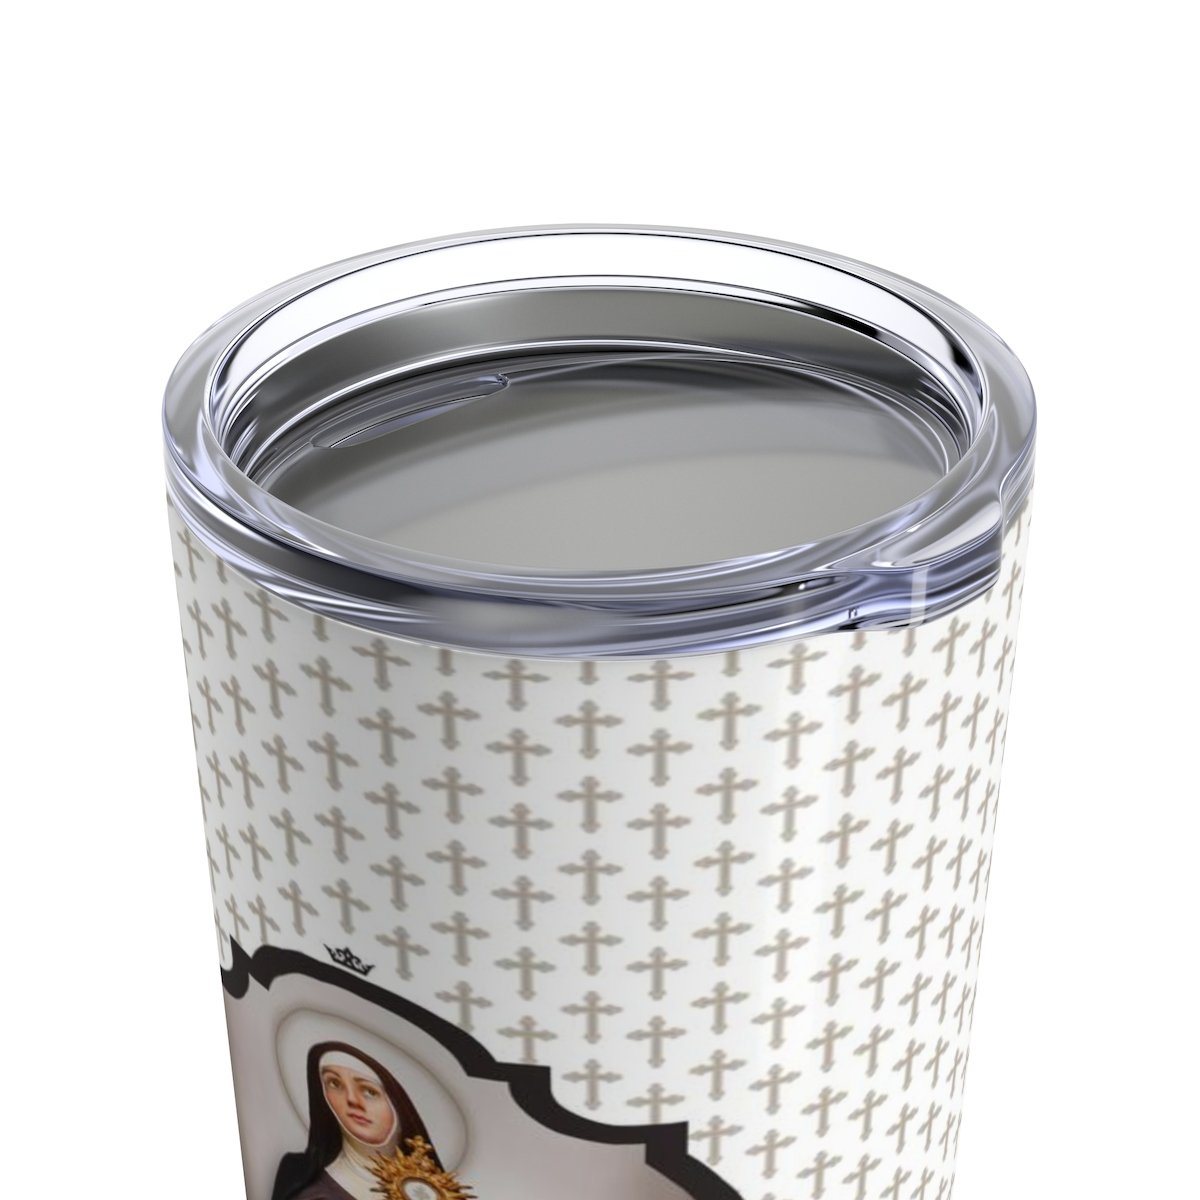 St. Clare of Assisi Tumbler 20 oz.